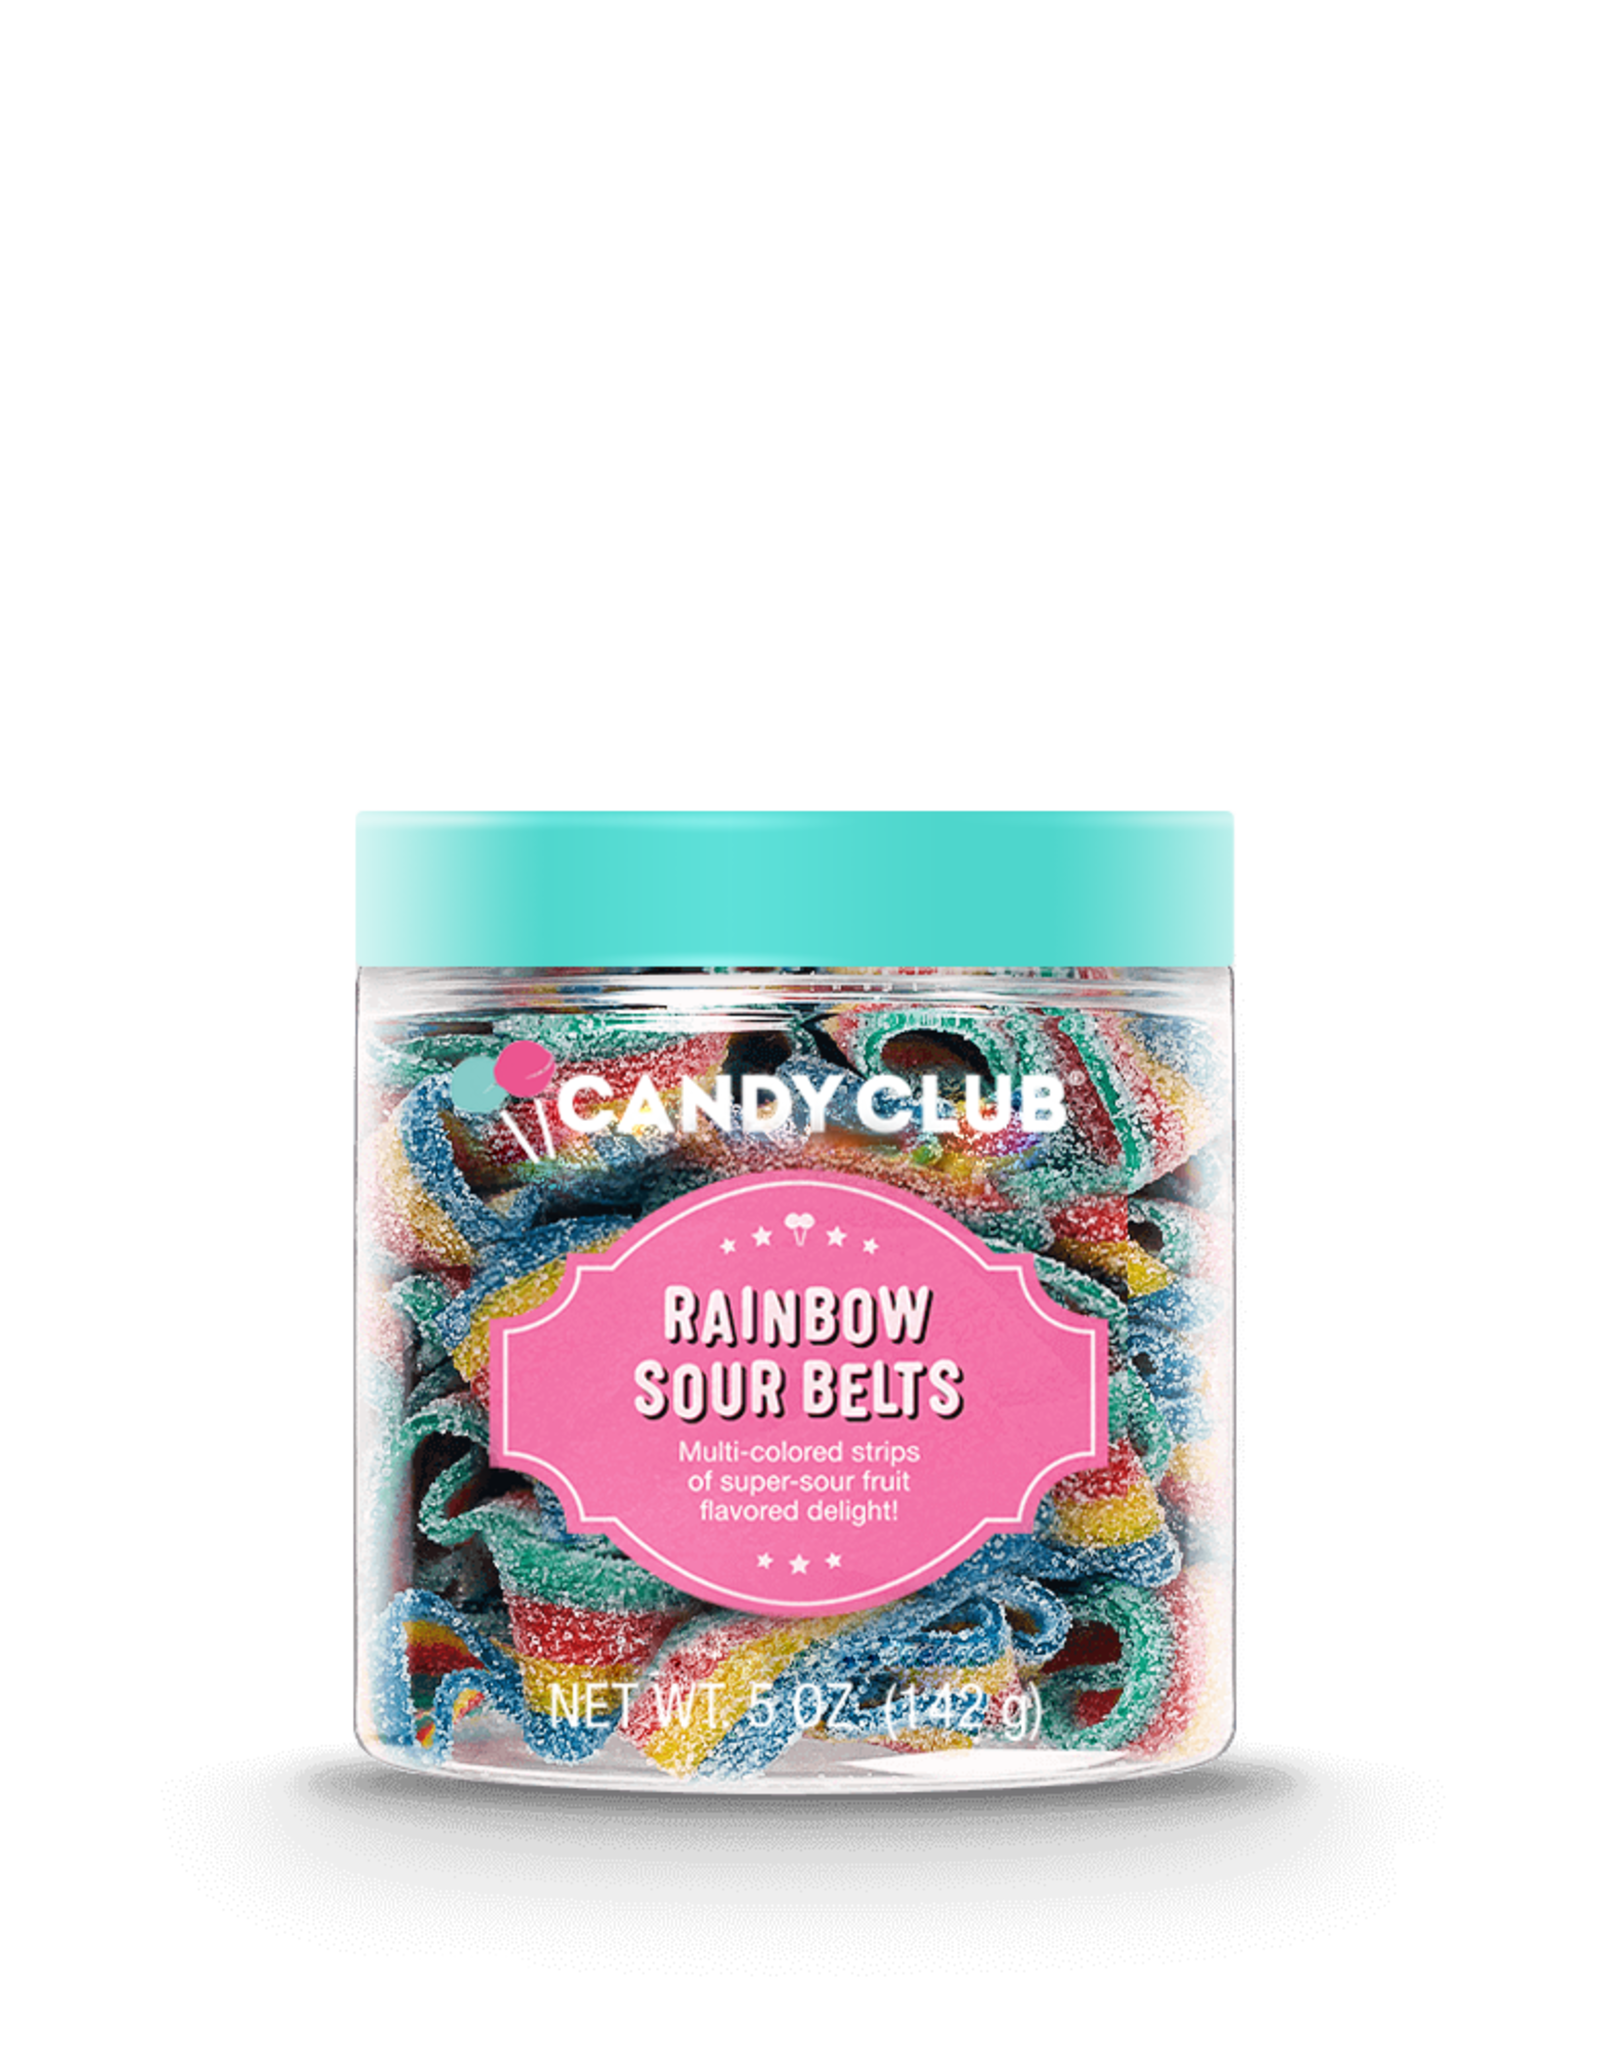 Candy Club August 2019 Subscription Box Review + Coupon - Hello Subscription